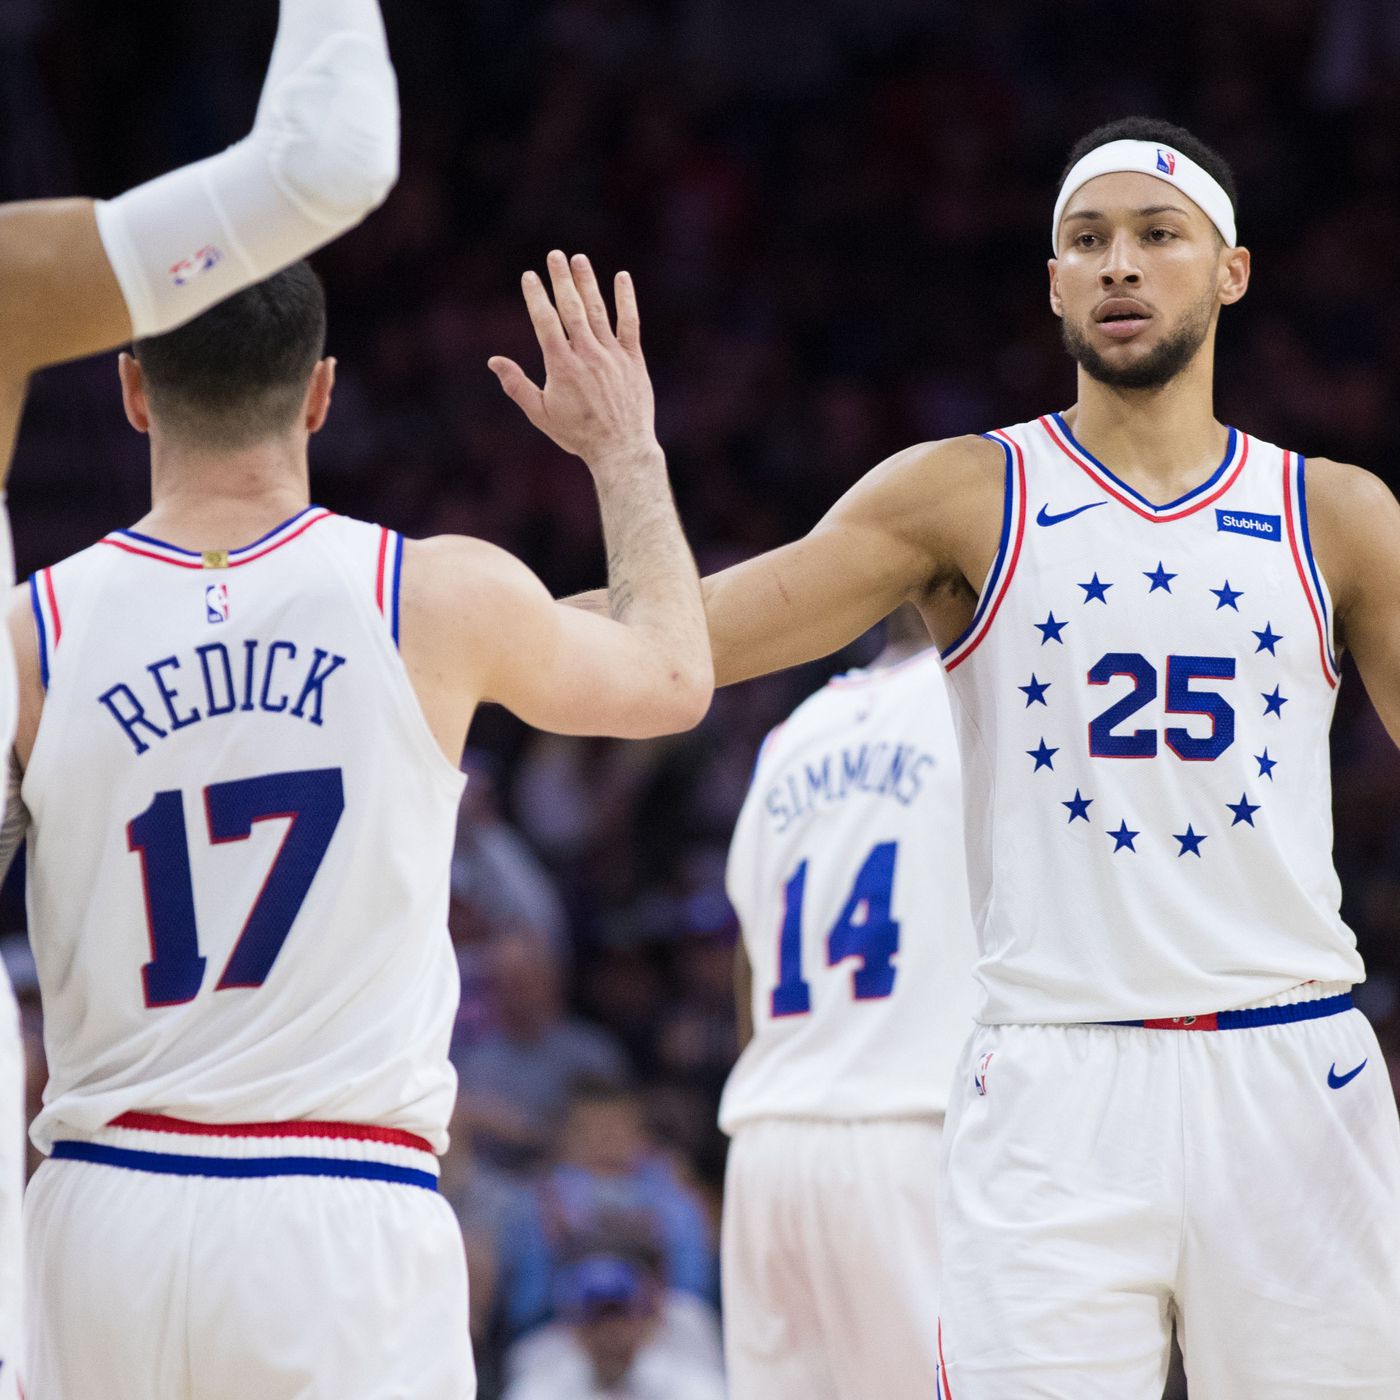 17 76ers stats in honor of JJ Redick's jersey number - Liberty Ballers